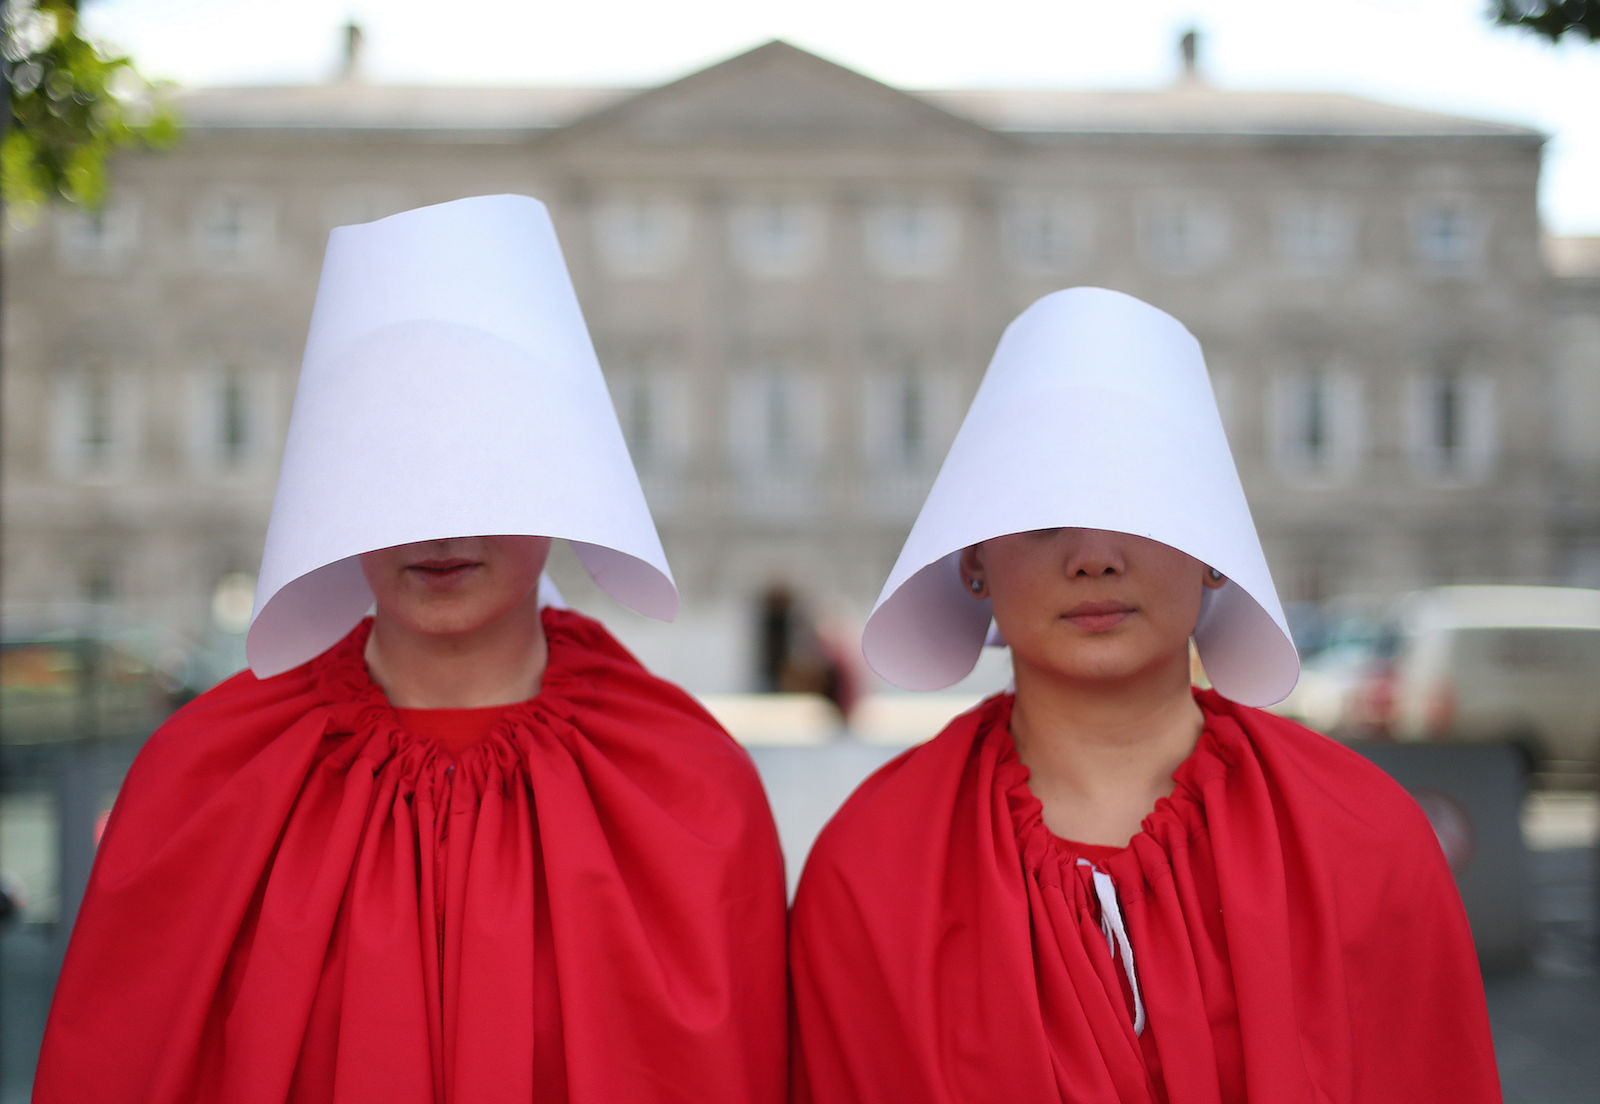 two protesters dressed in red robes and white headdresses like handmaid's tale